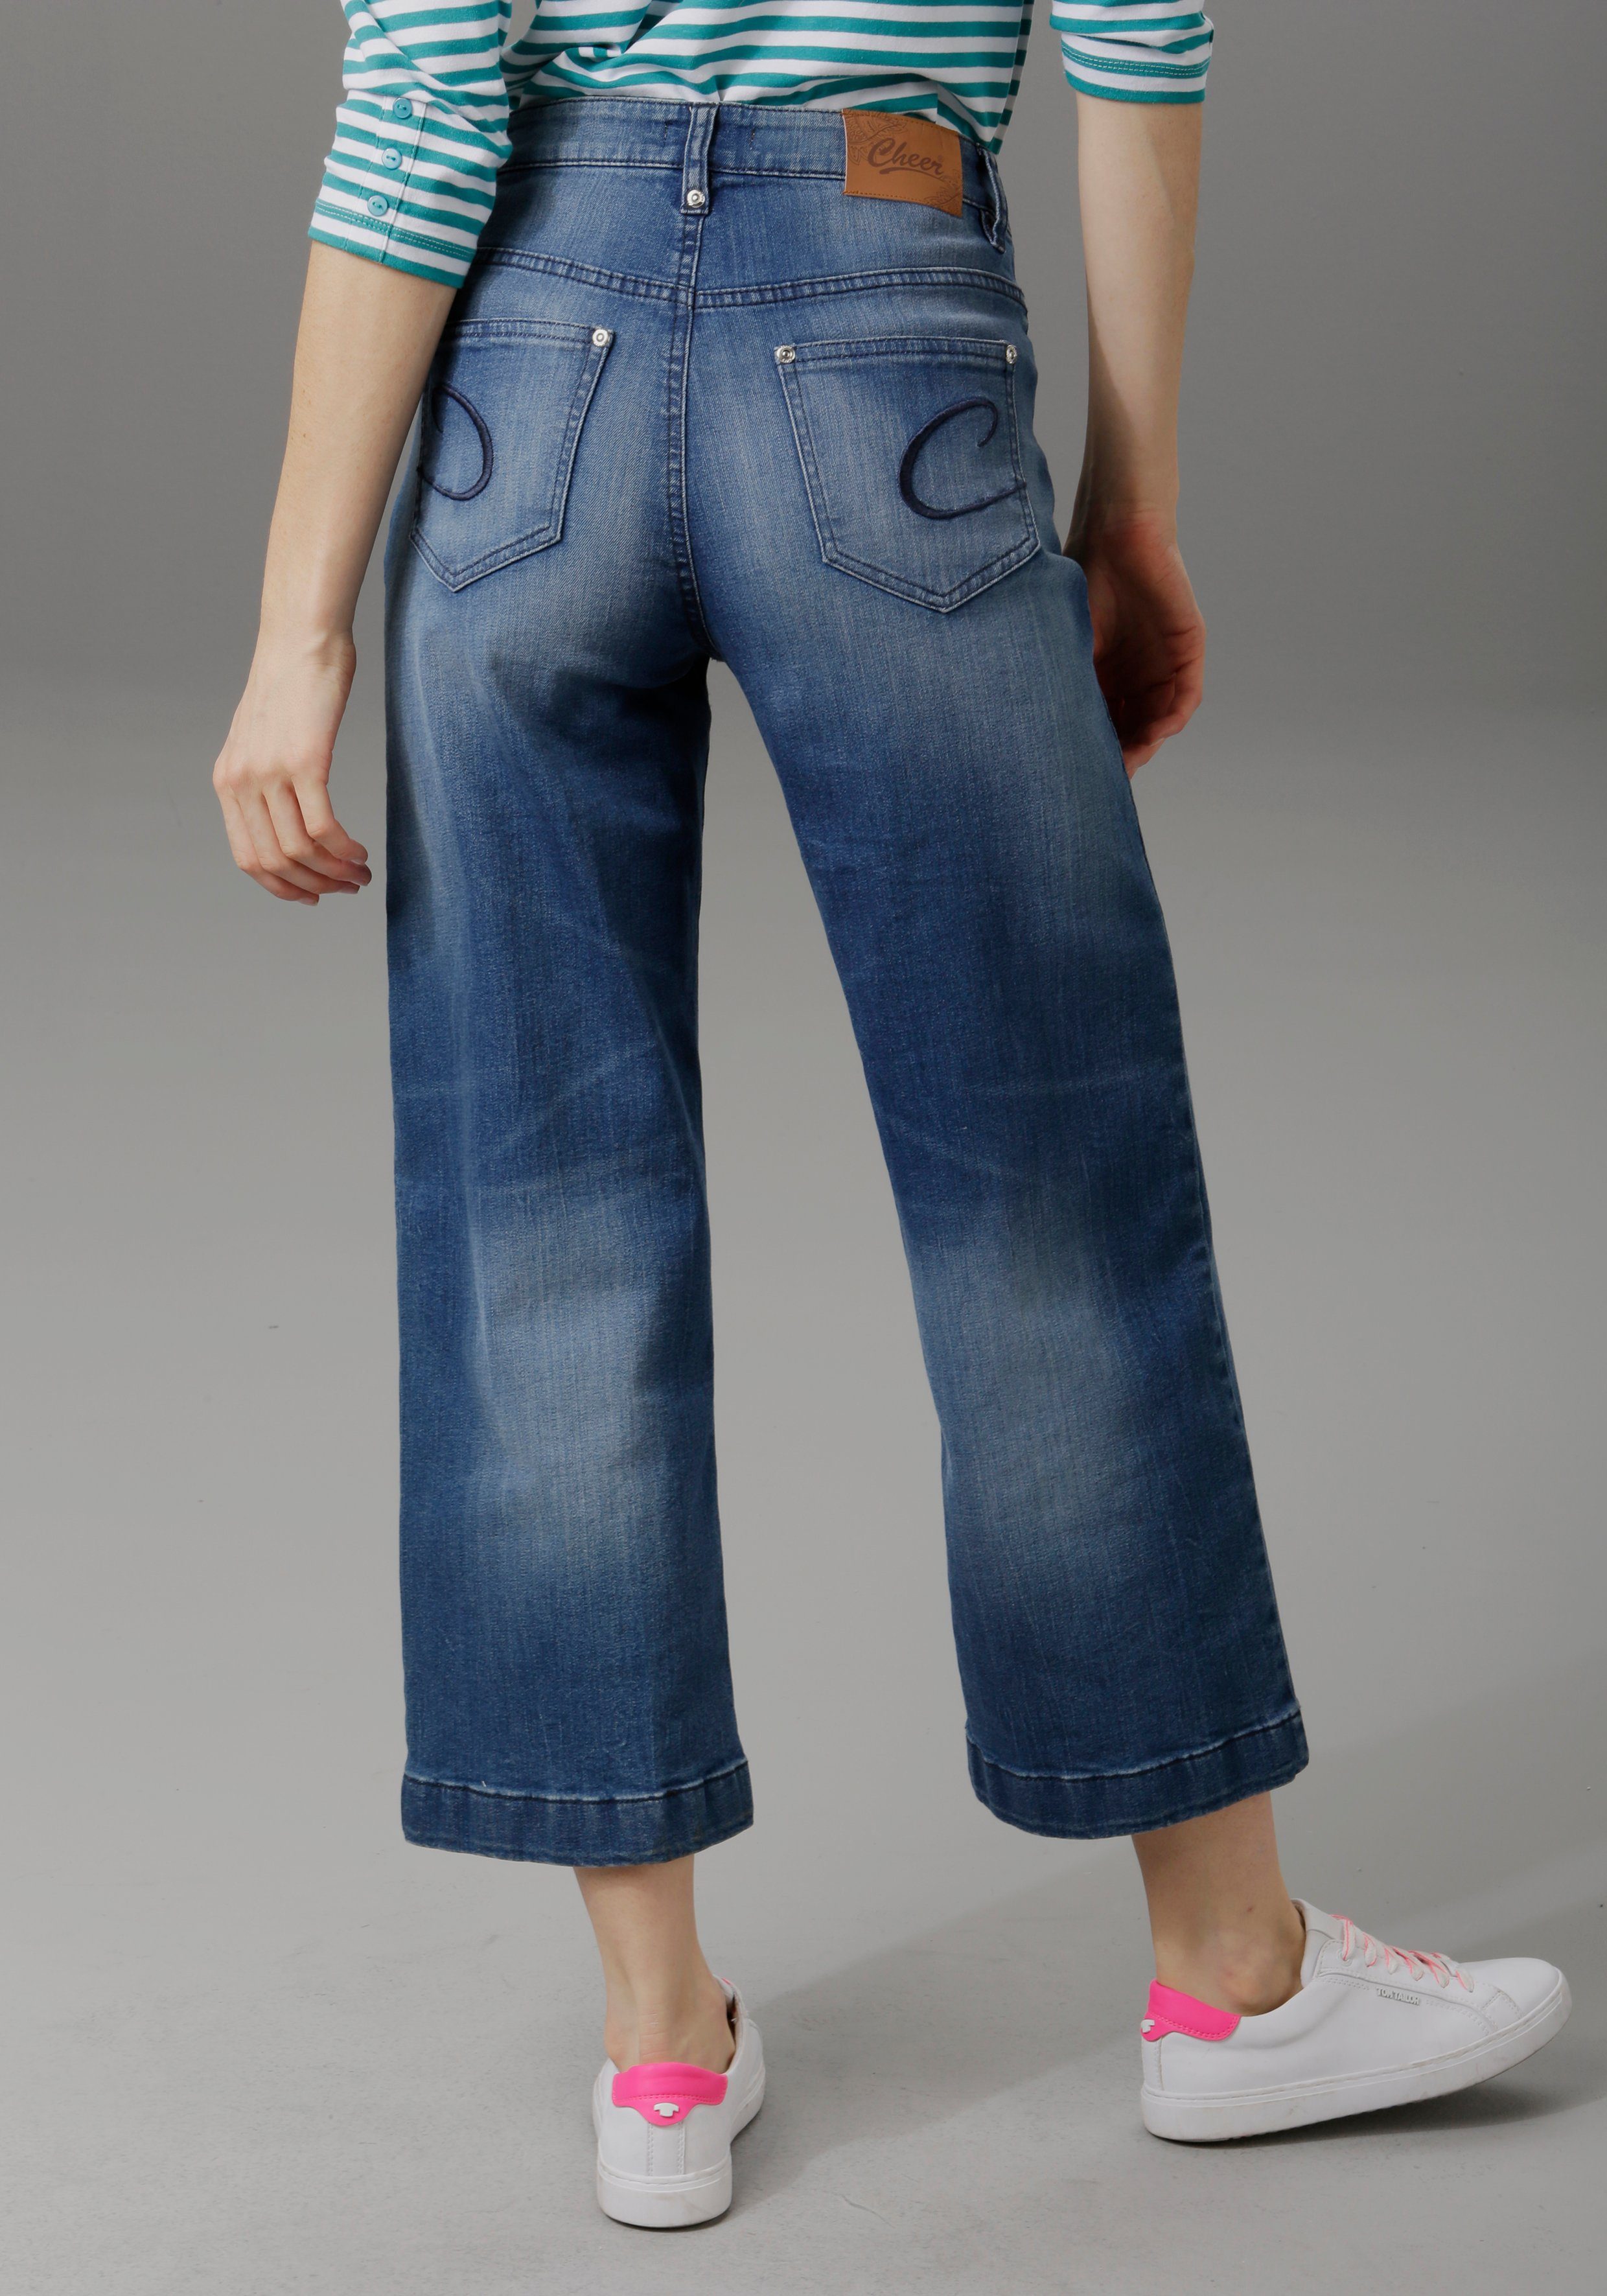 Aniston CASUAL 7/8-Jeans in blue Used-Waschung